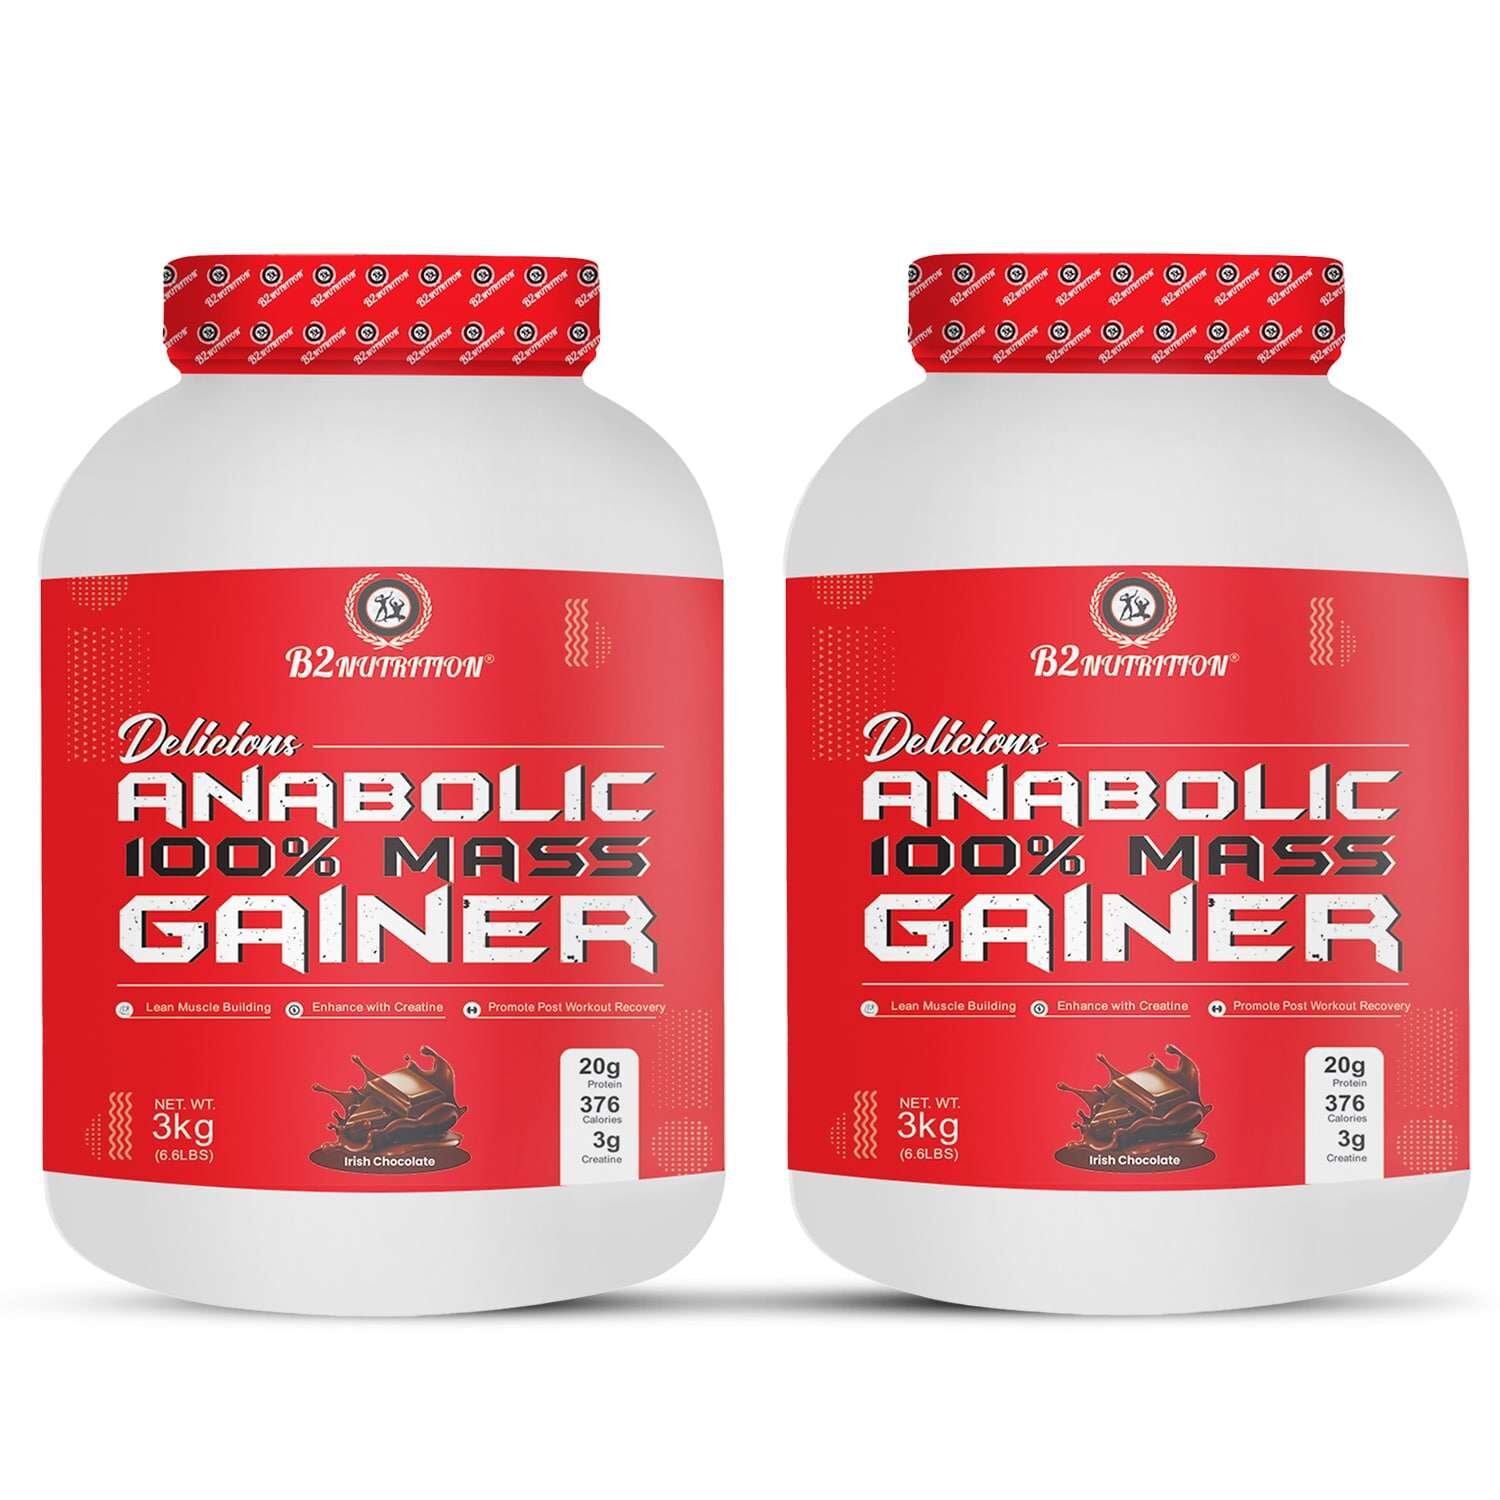 Anabolic mass gainer 3kg Pack up 2